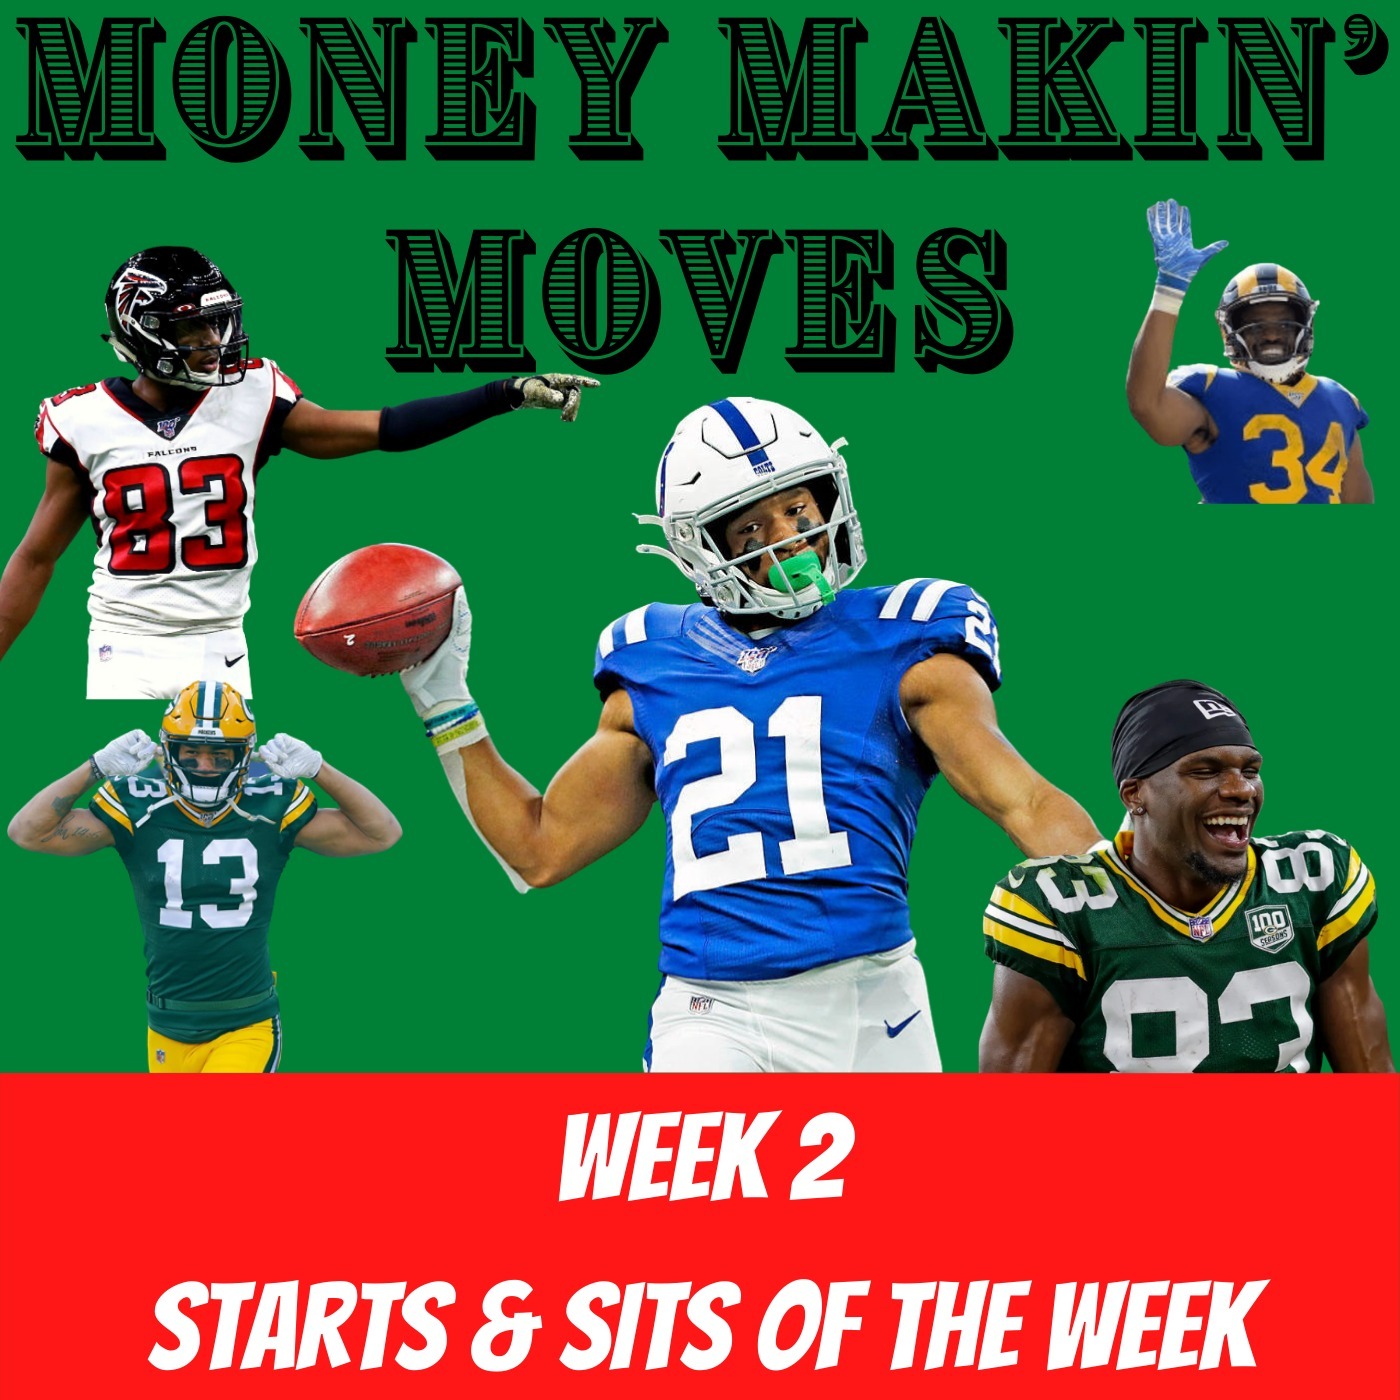 Week 2 Offensive Starts & Sits of the Week | Money Makin' Moves